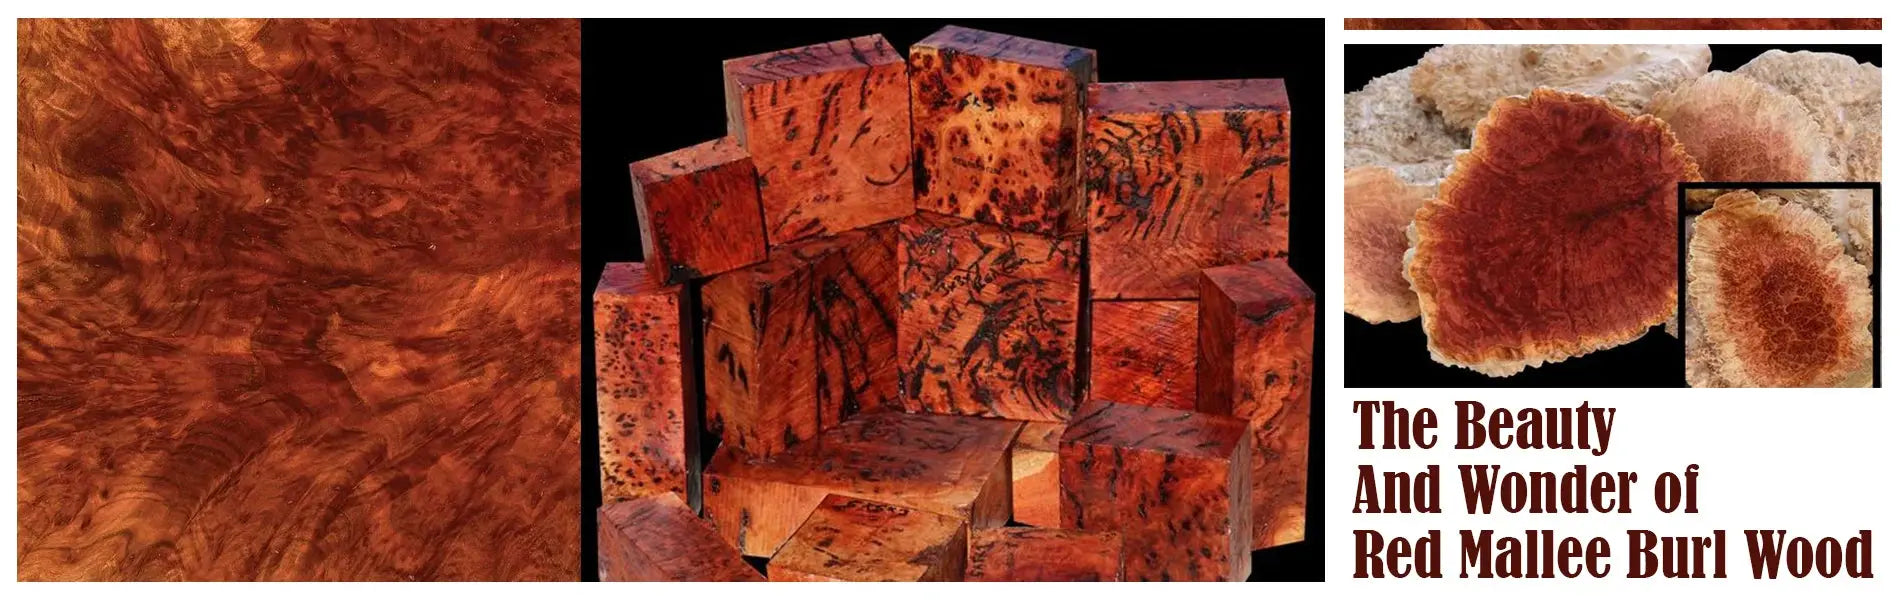 The-Beauty-and-Wonder-of-Red-Mallee-Burl-Wood Exotic Wood Zone